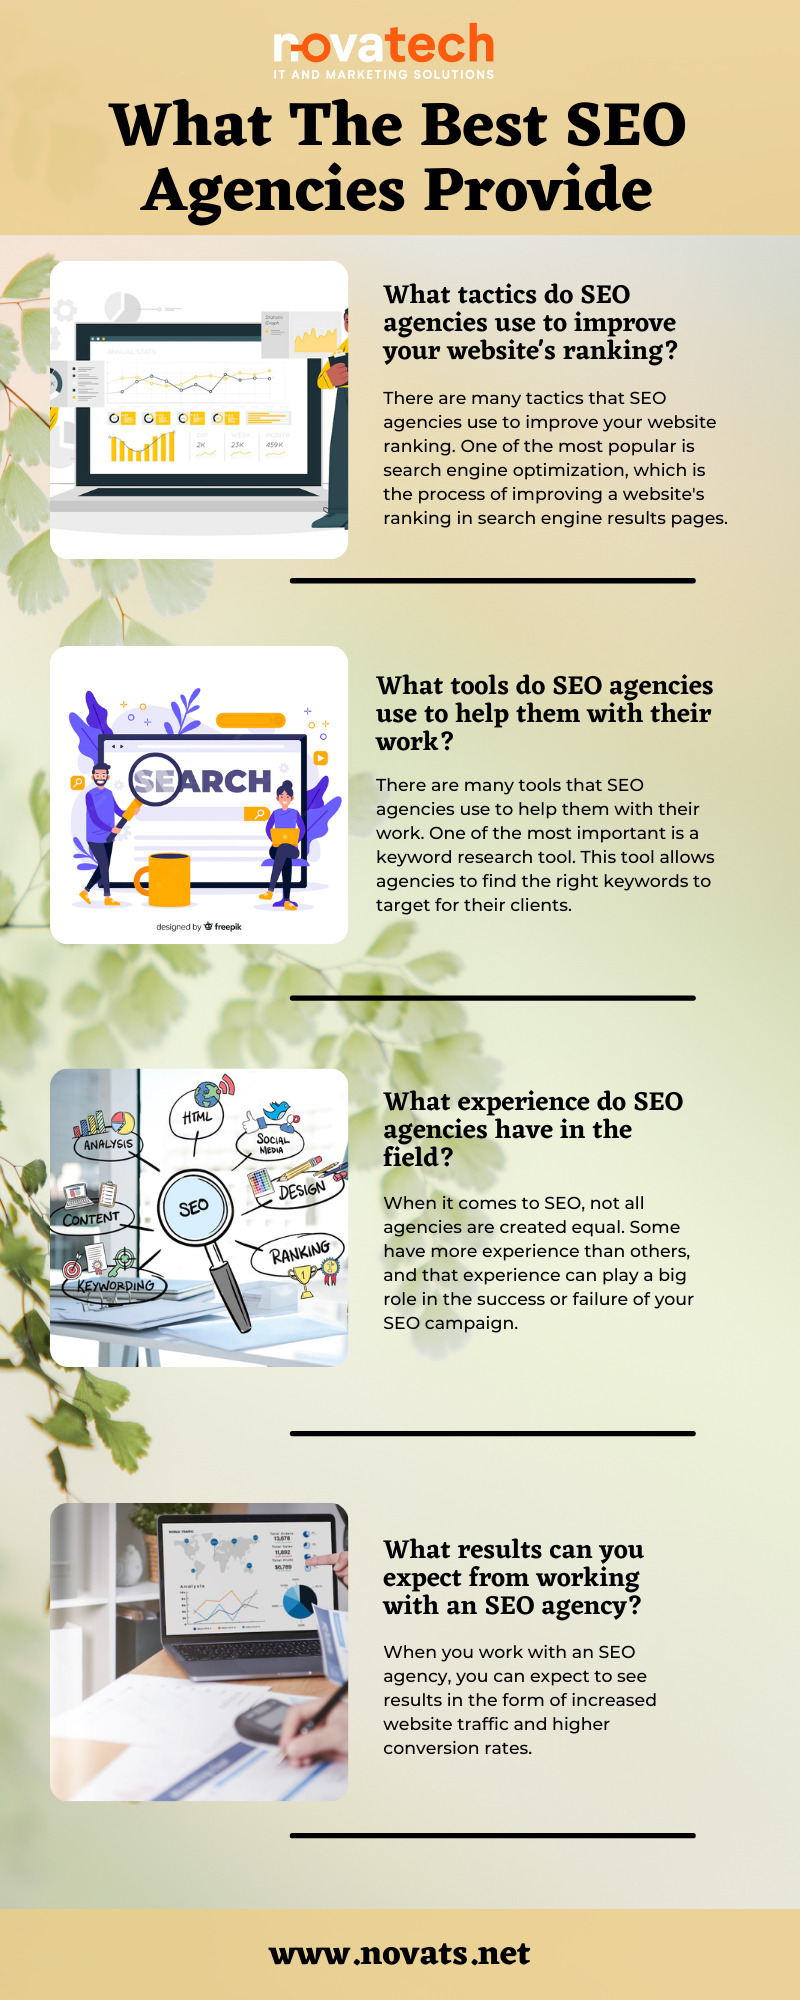 What The Best SEO Agencies Provide